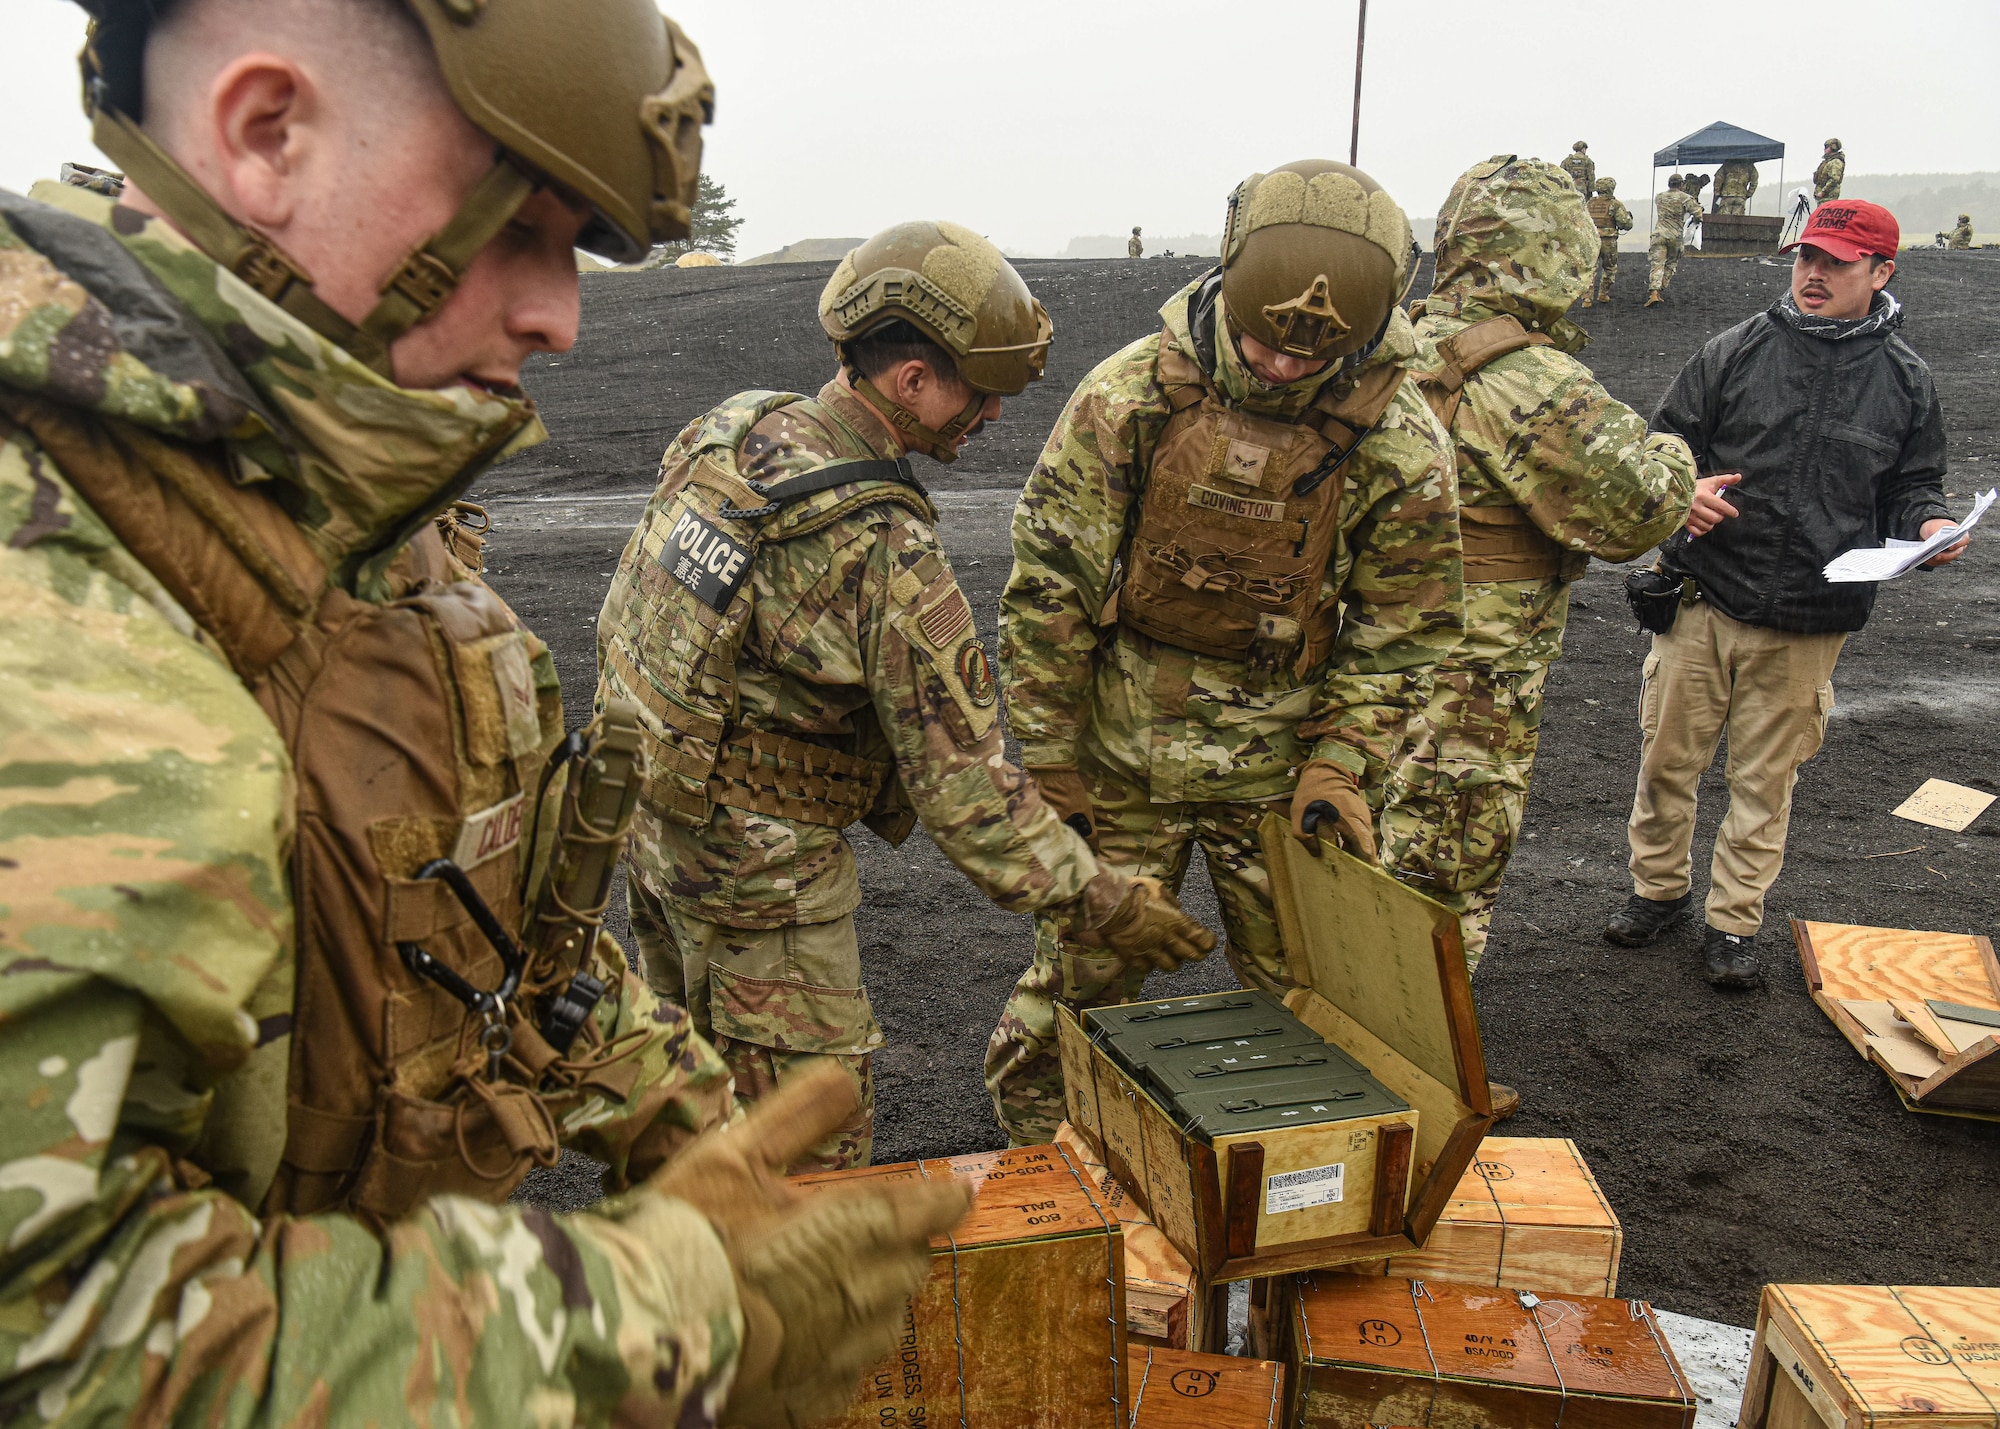 U.S. servicemembers open up boxes of ammunition.